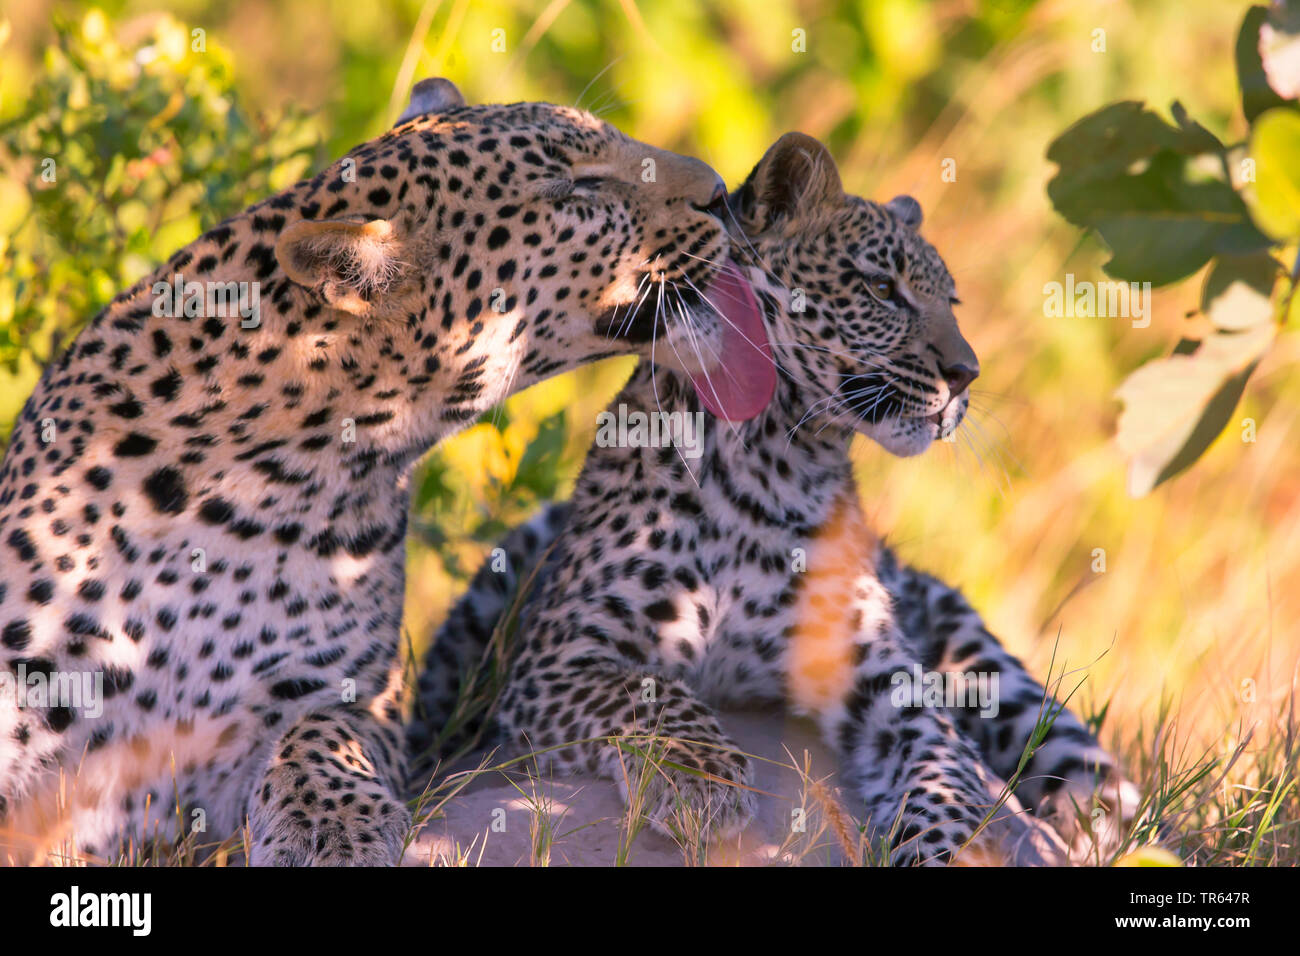 leopard (Panthera pardus), caring leopardess resting with a young animal in the shadow, Botswana Stock Photo